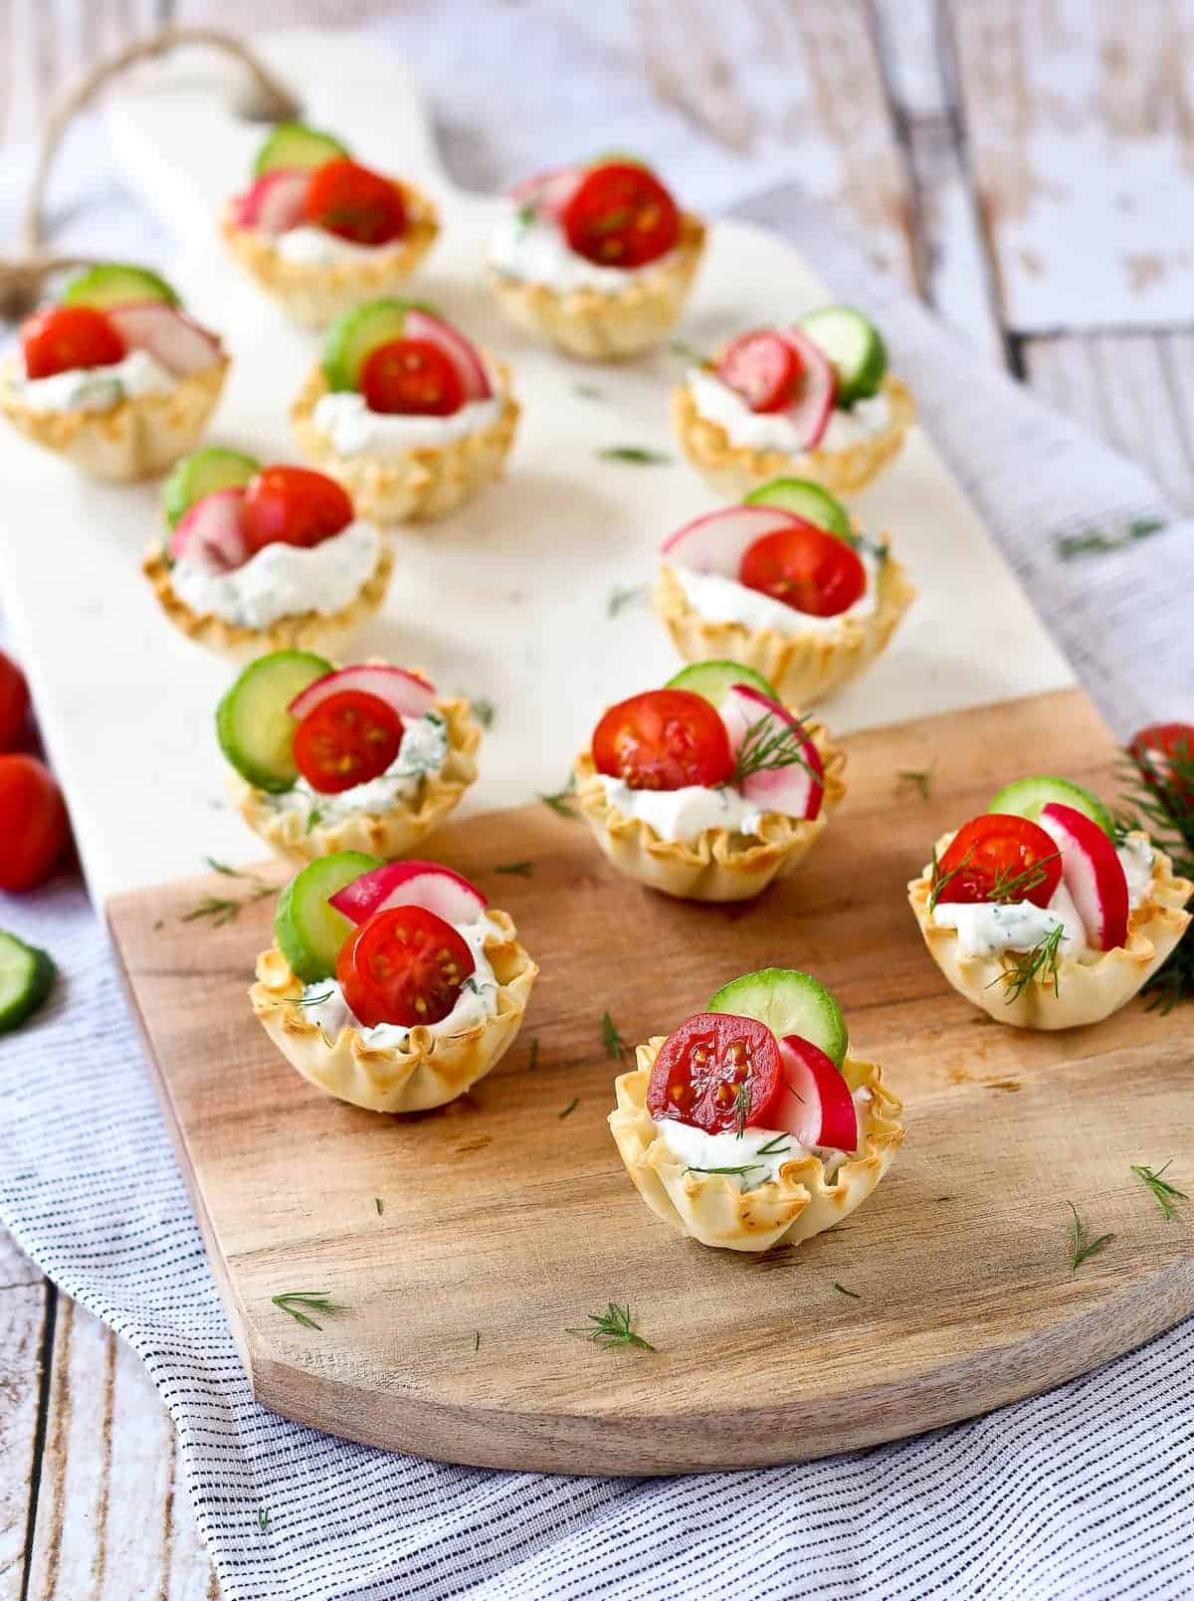 How Can I Make Appetizers That Are Both Visually Appealing and Delicious?